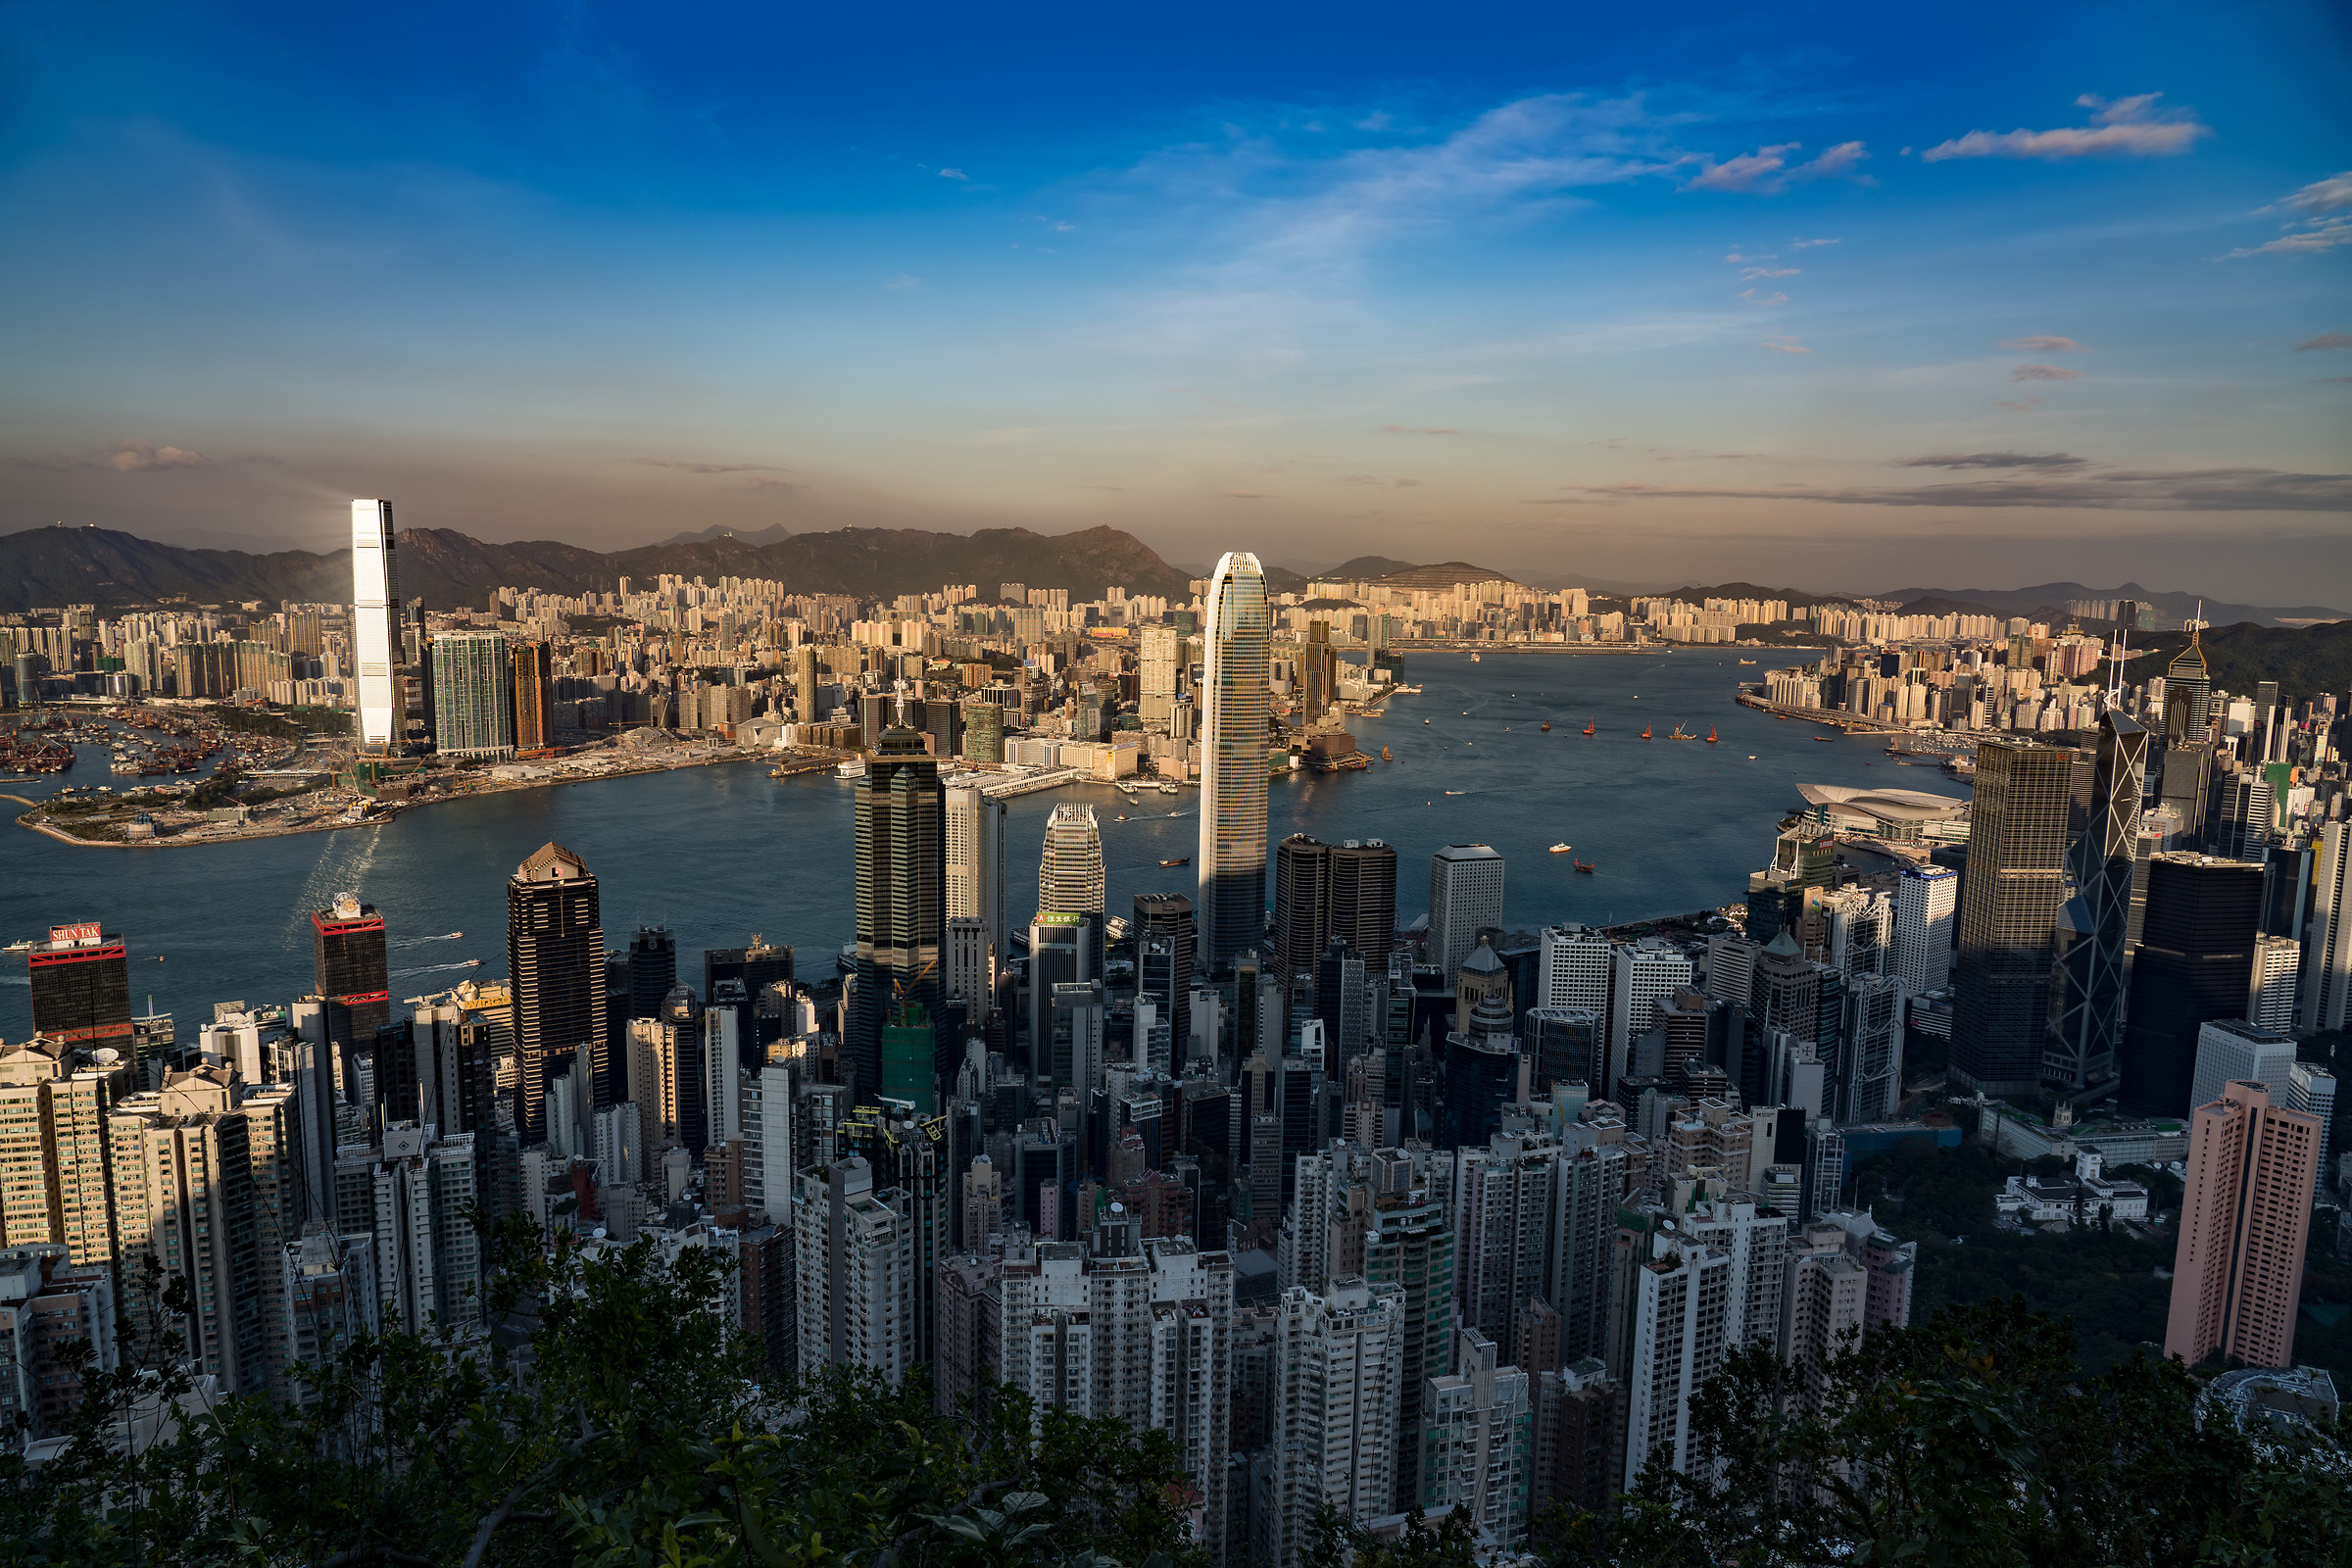 A7rIII and 24-105 G from Victoria Peak...